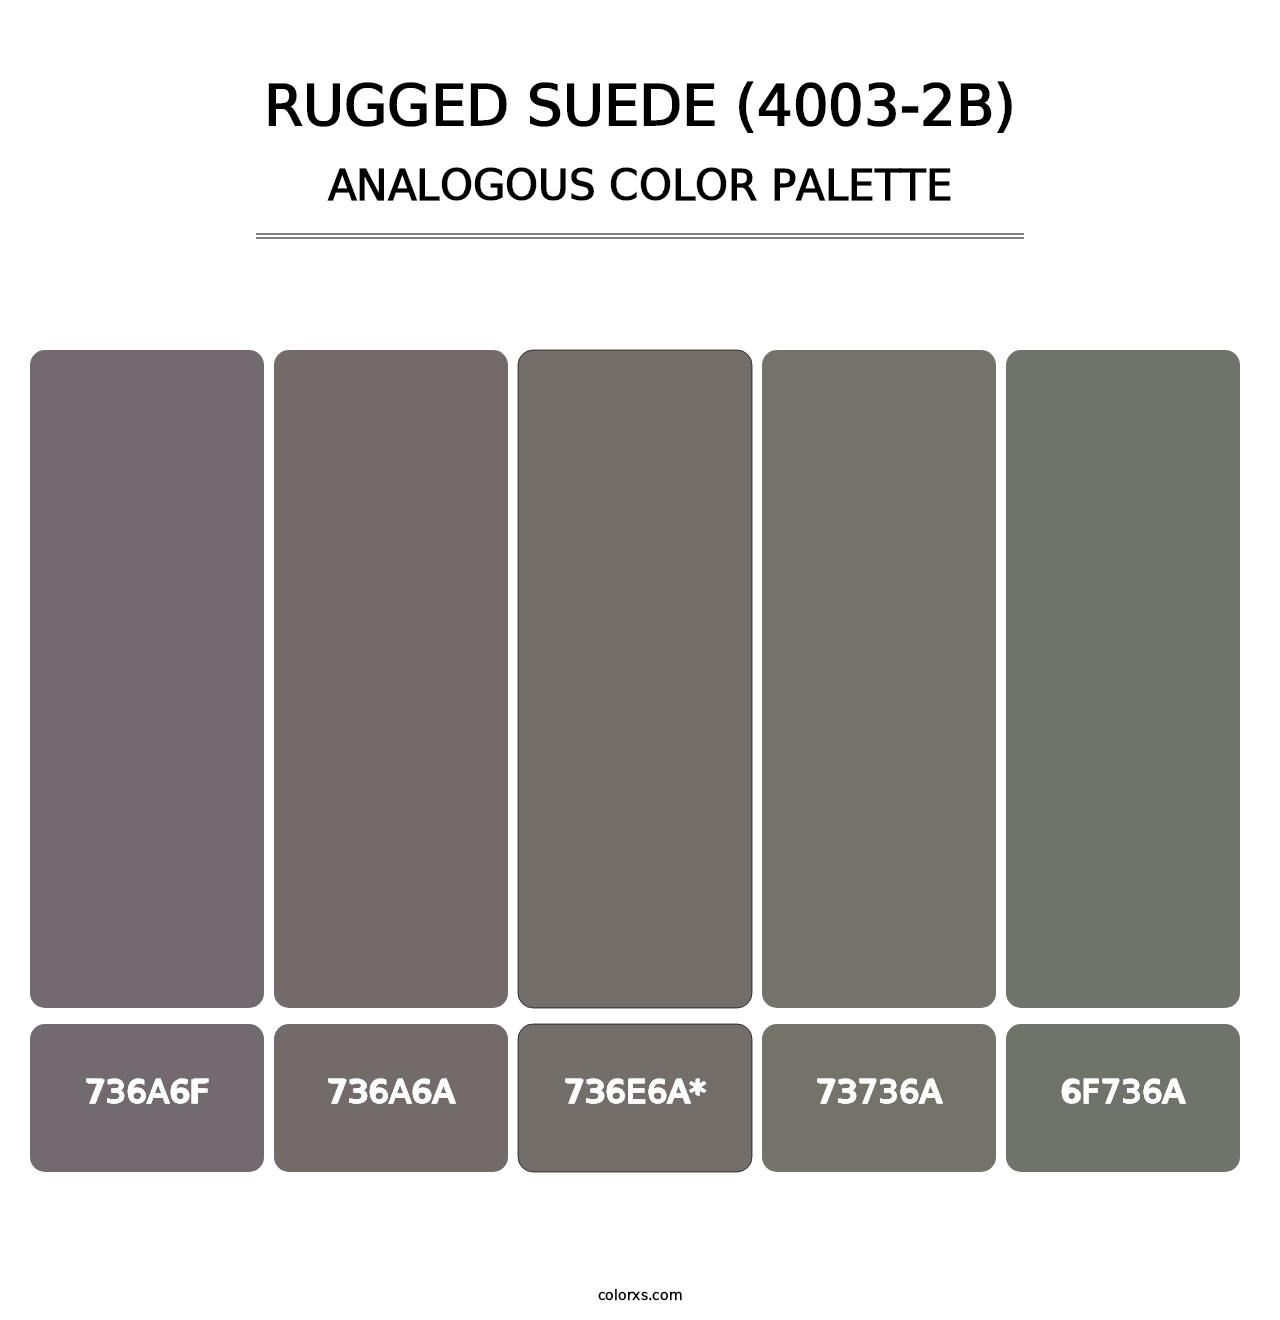 Rugged Suede (4003-2B) - Analogous Color Palette